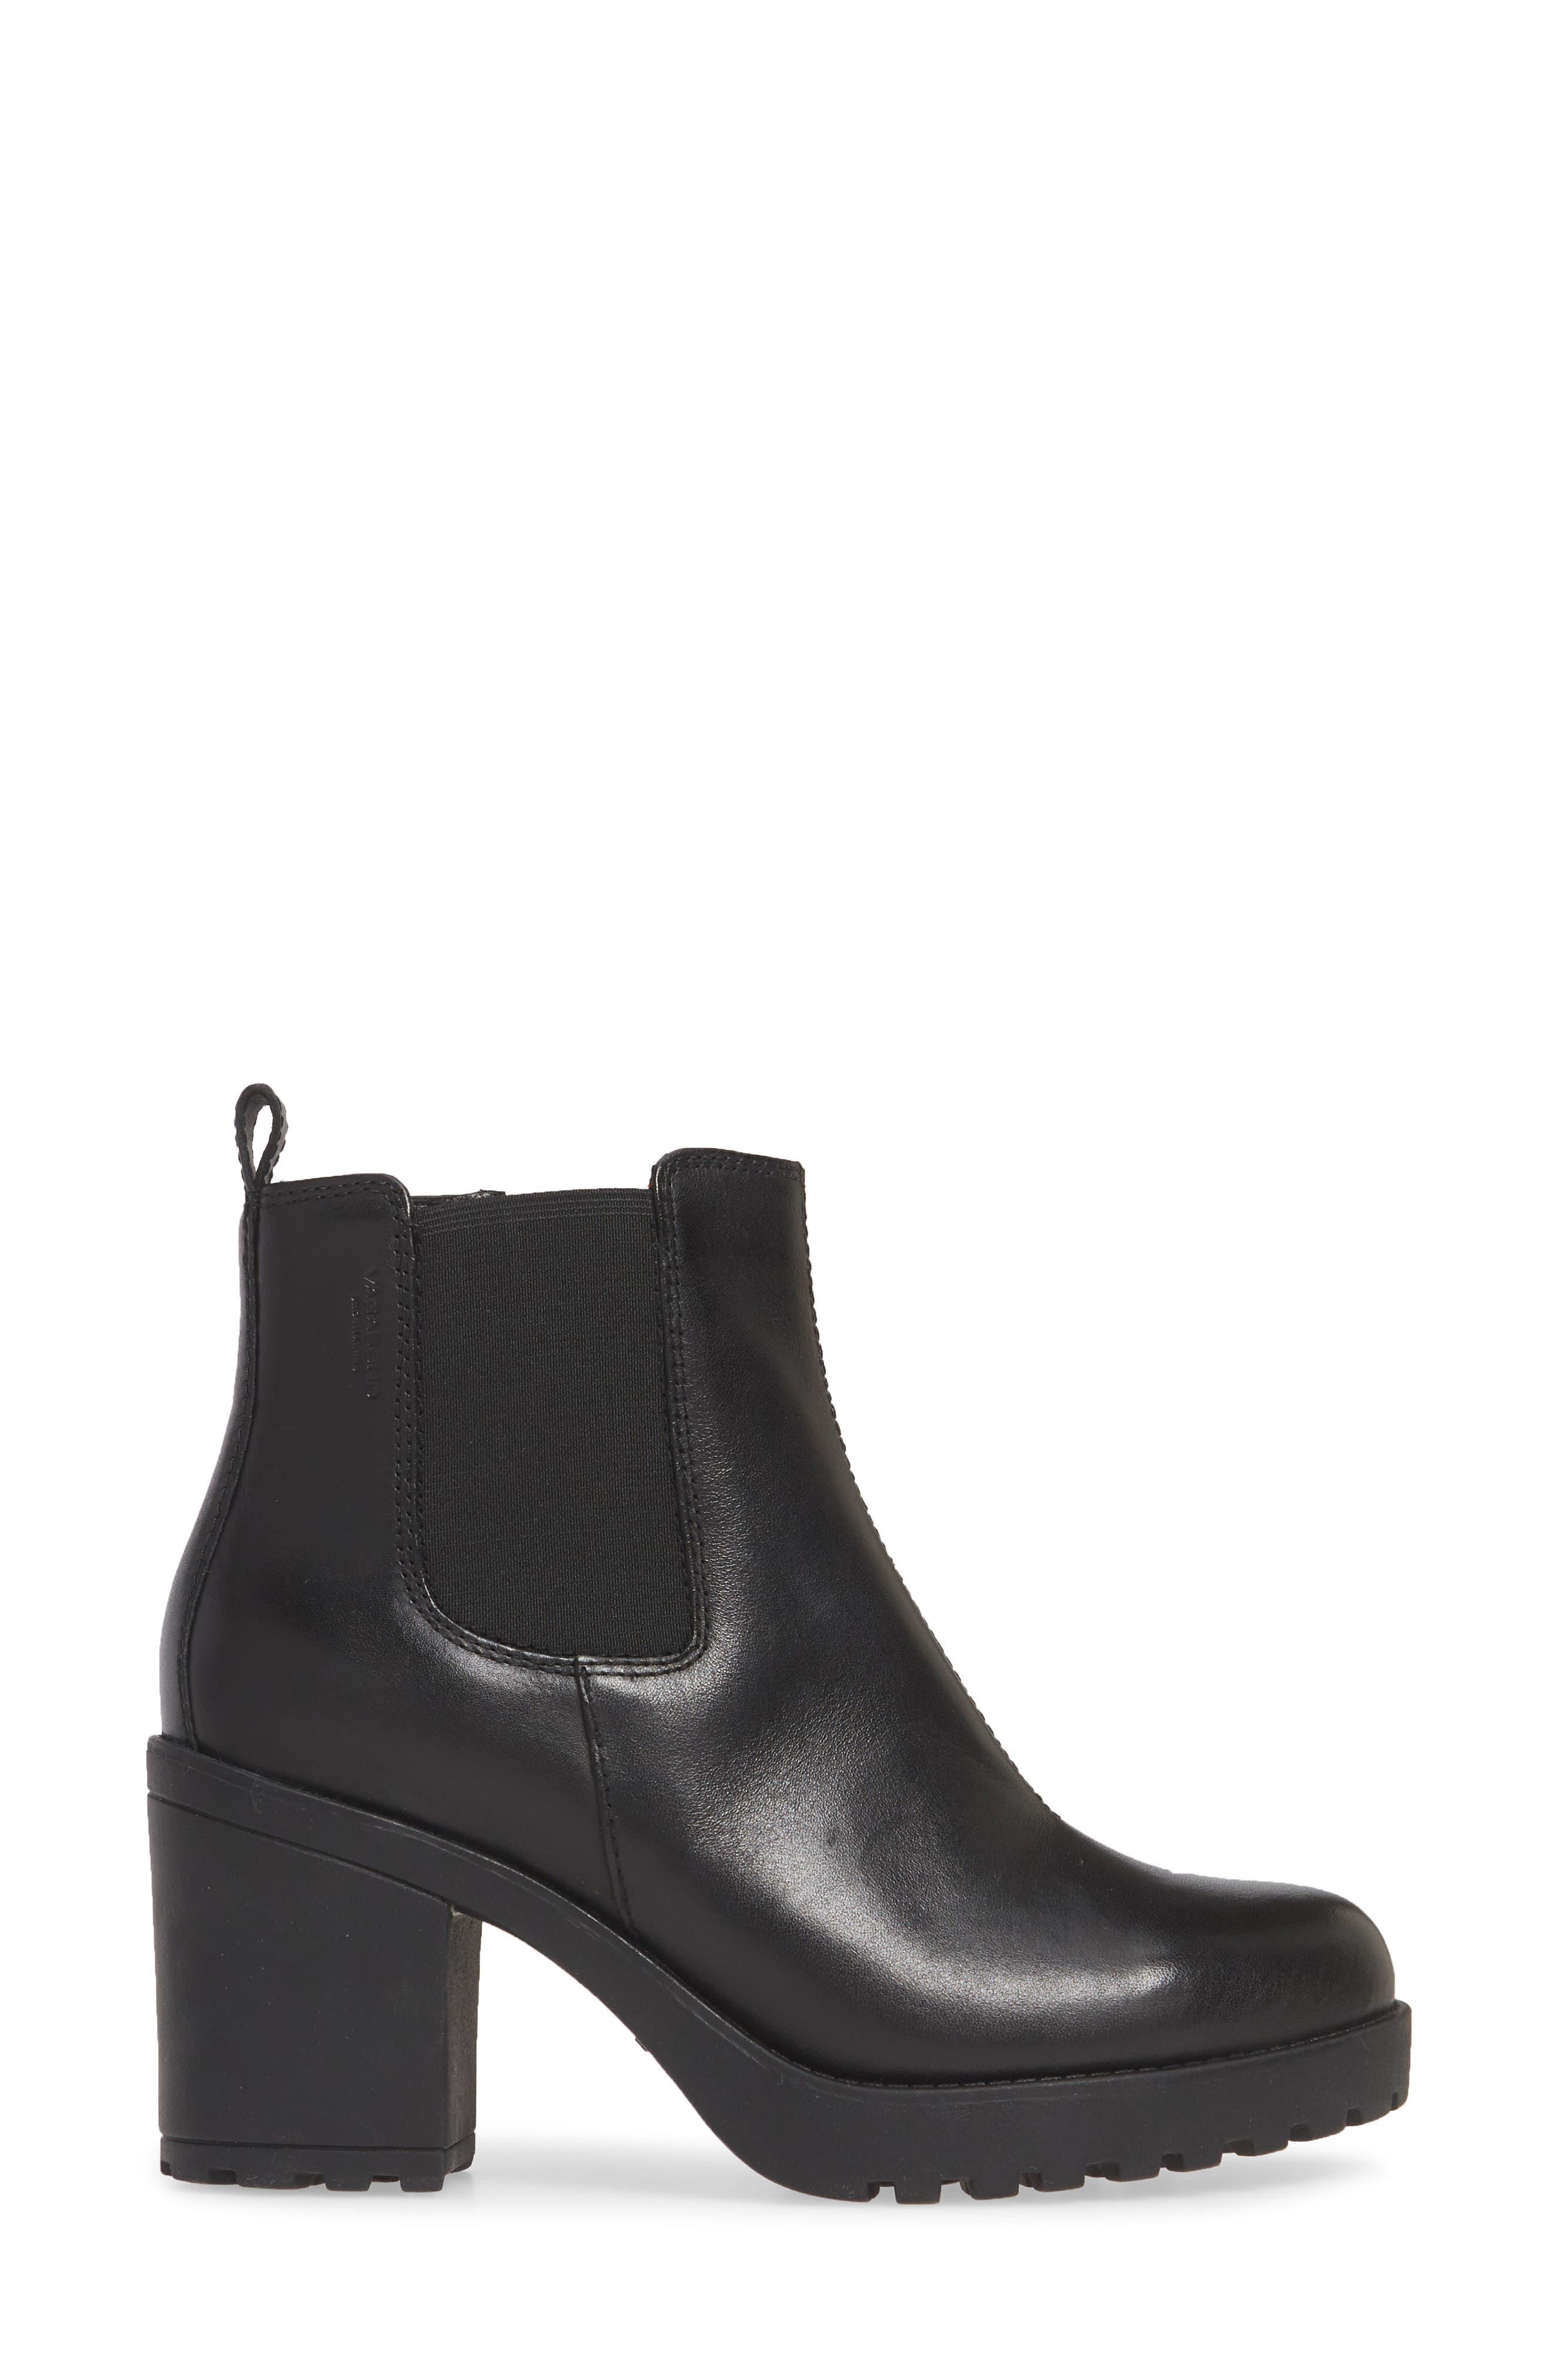 Vagabond Shoemakers Grace Chelsea Boot in Black Leather (Black) | Lyst